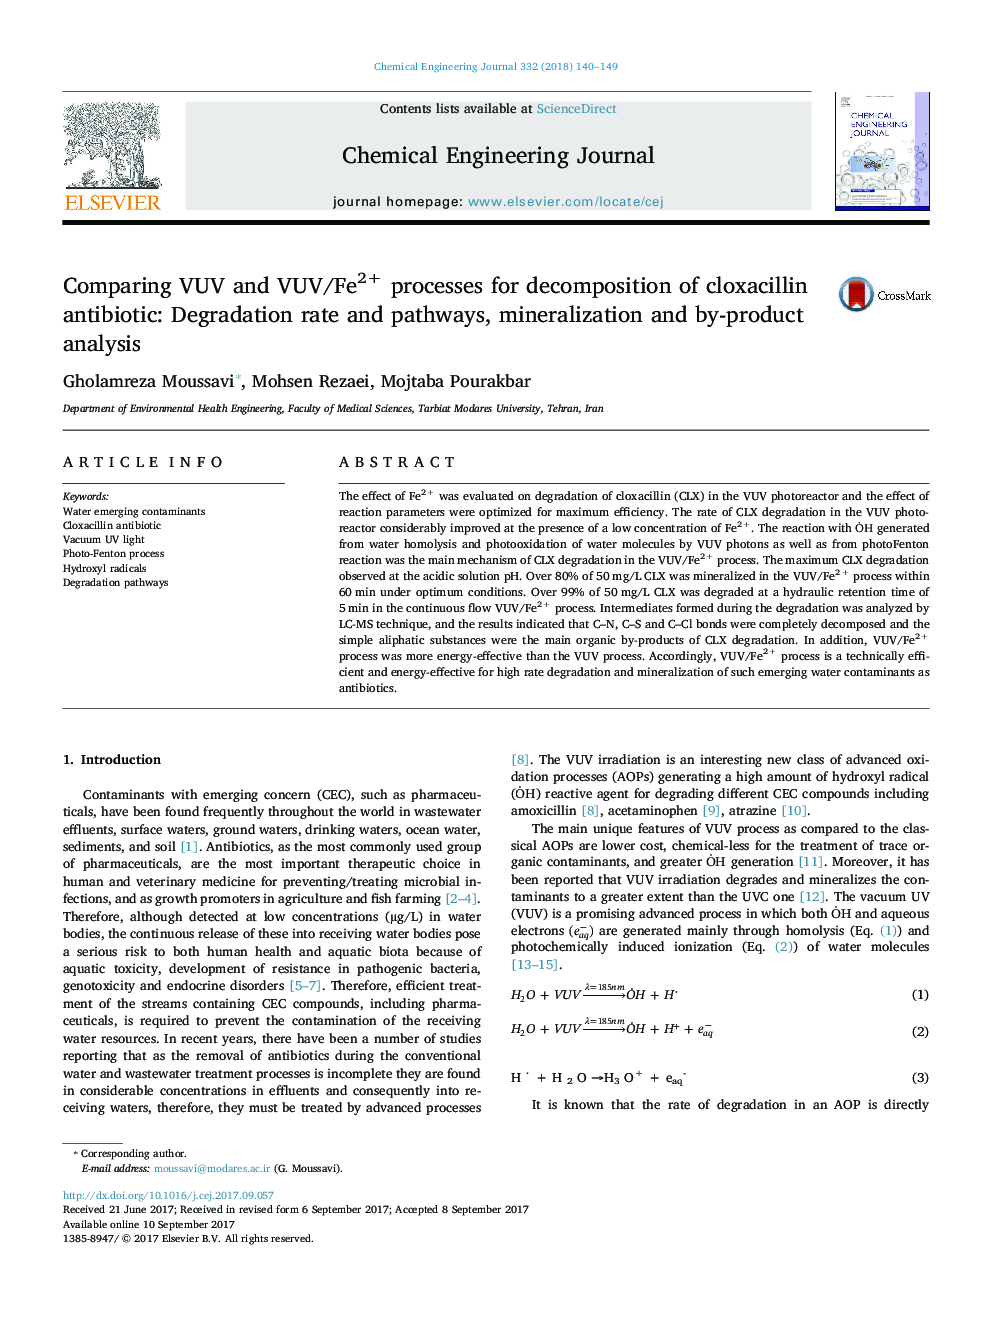 Comparing VUV and VUV/Fe2+ processes for decomposition of cloxacillin antibiotic: Degradation rate and pathways, mineralization and by-product analysis